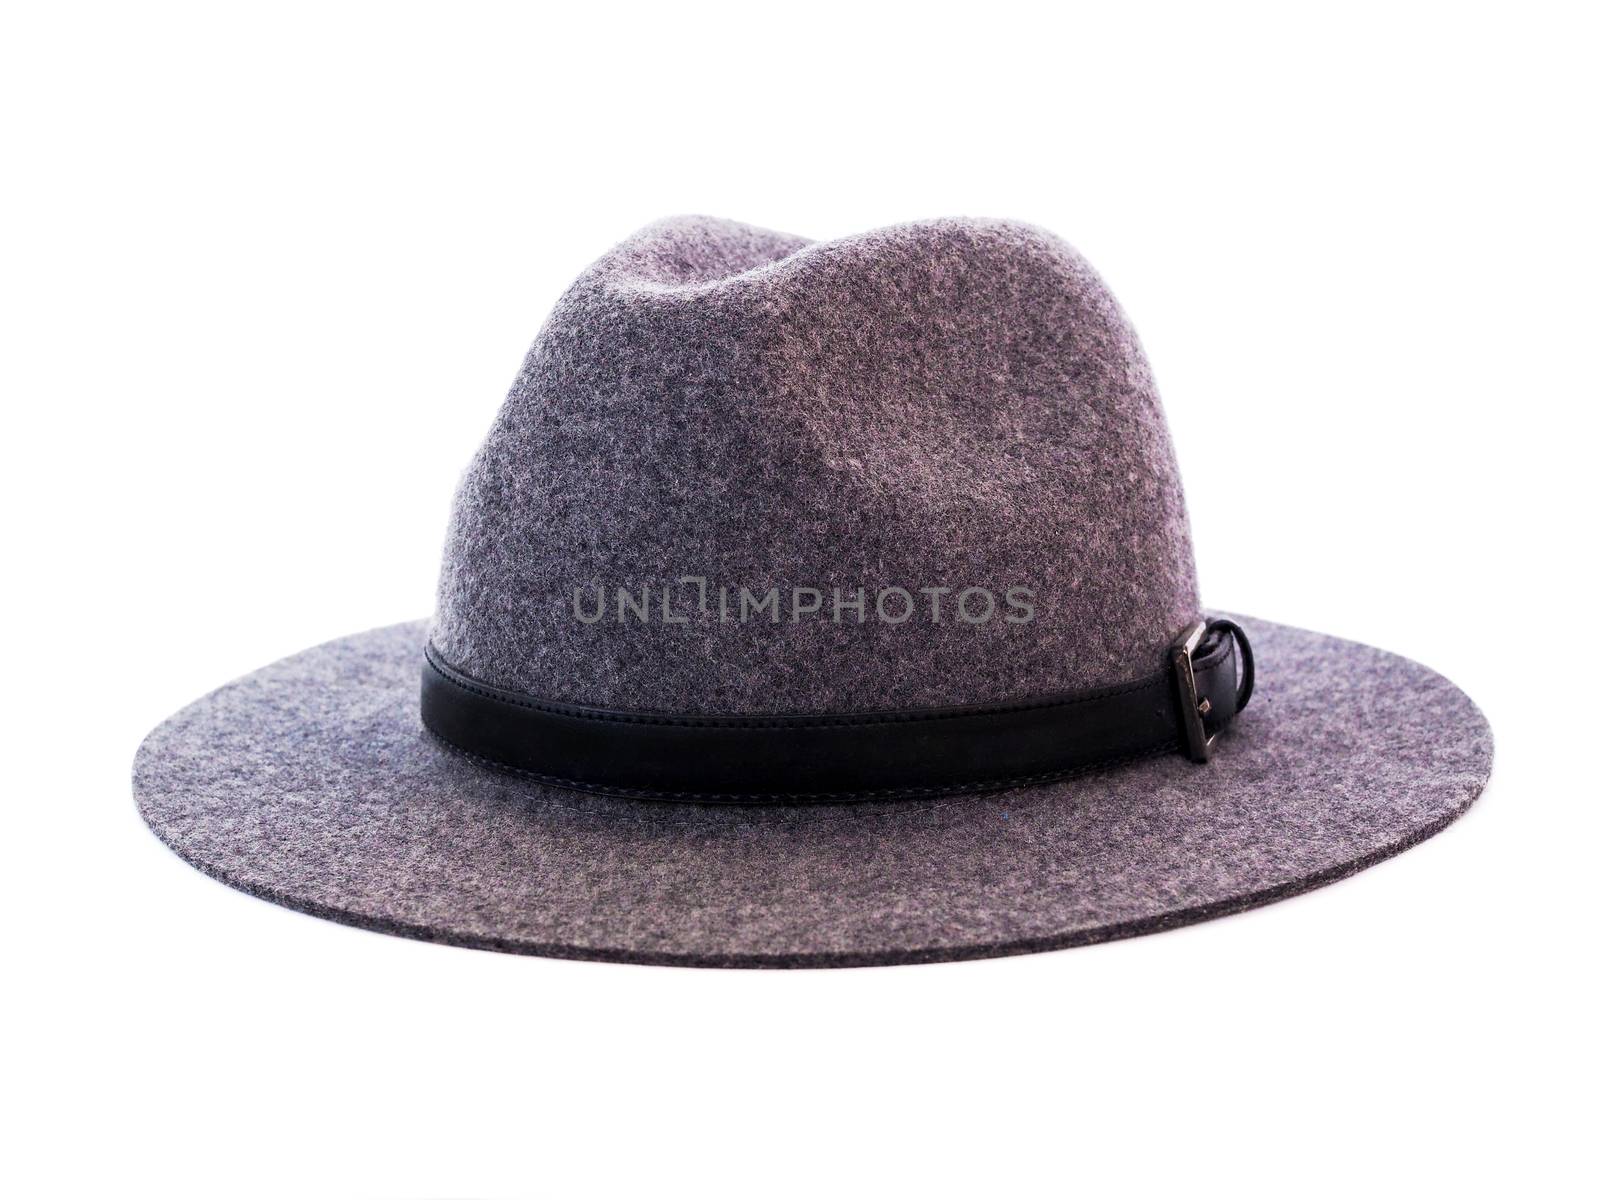 Vintage Panama hat for men Made of gray flannel fabric. classic style fashion accessories isolated on white background.